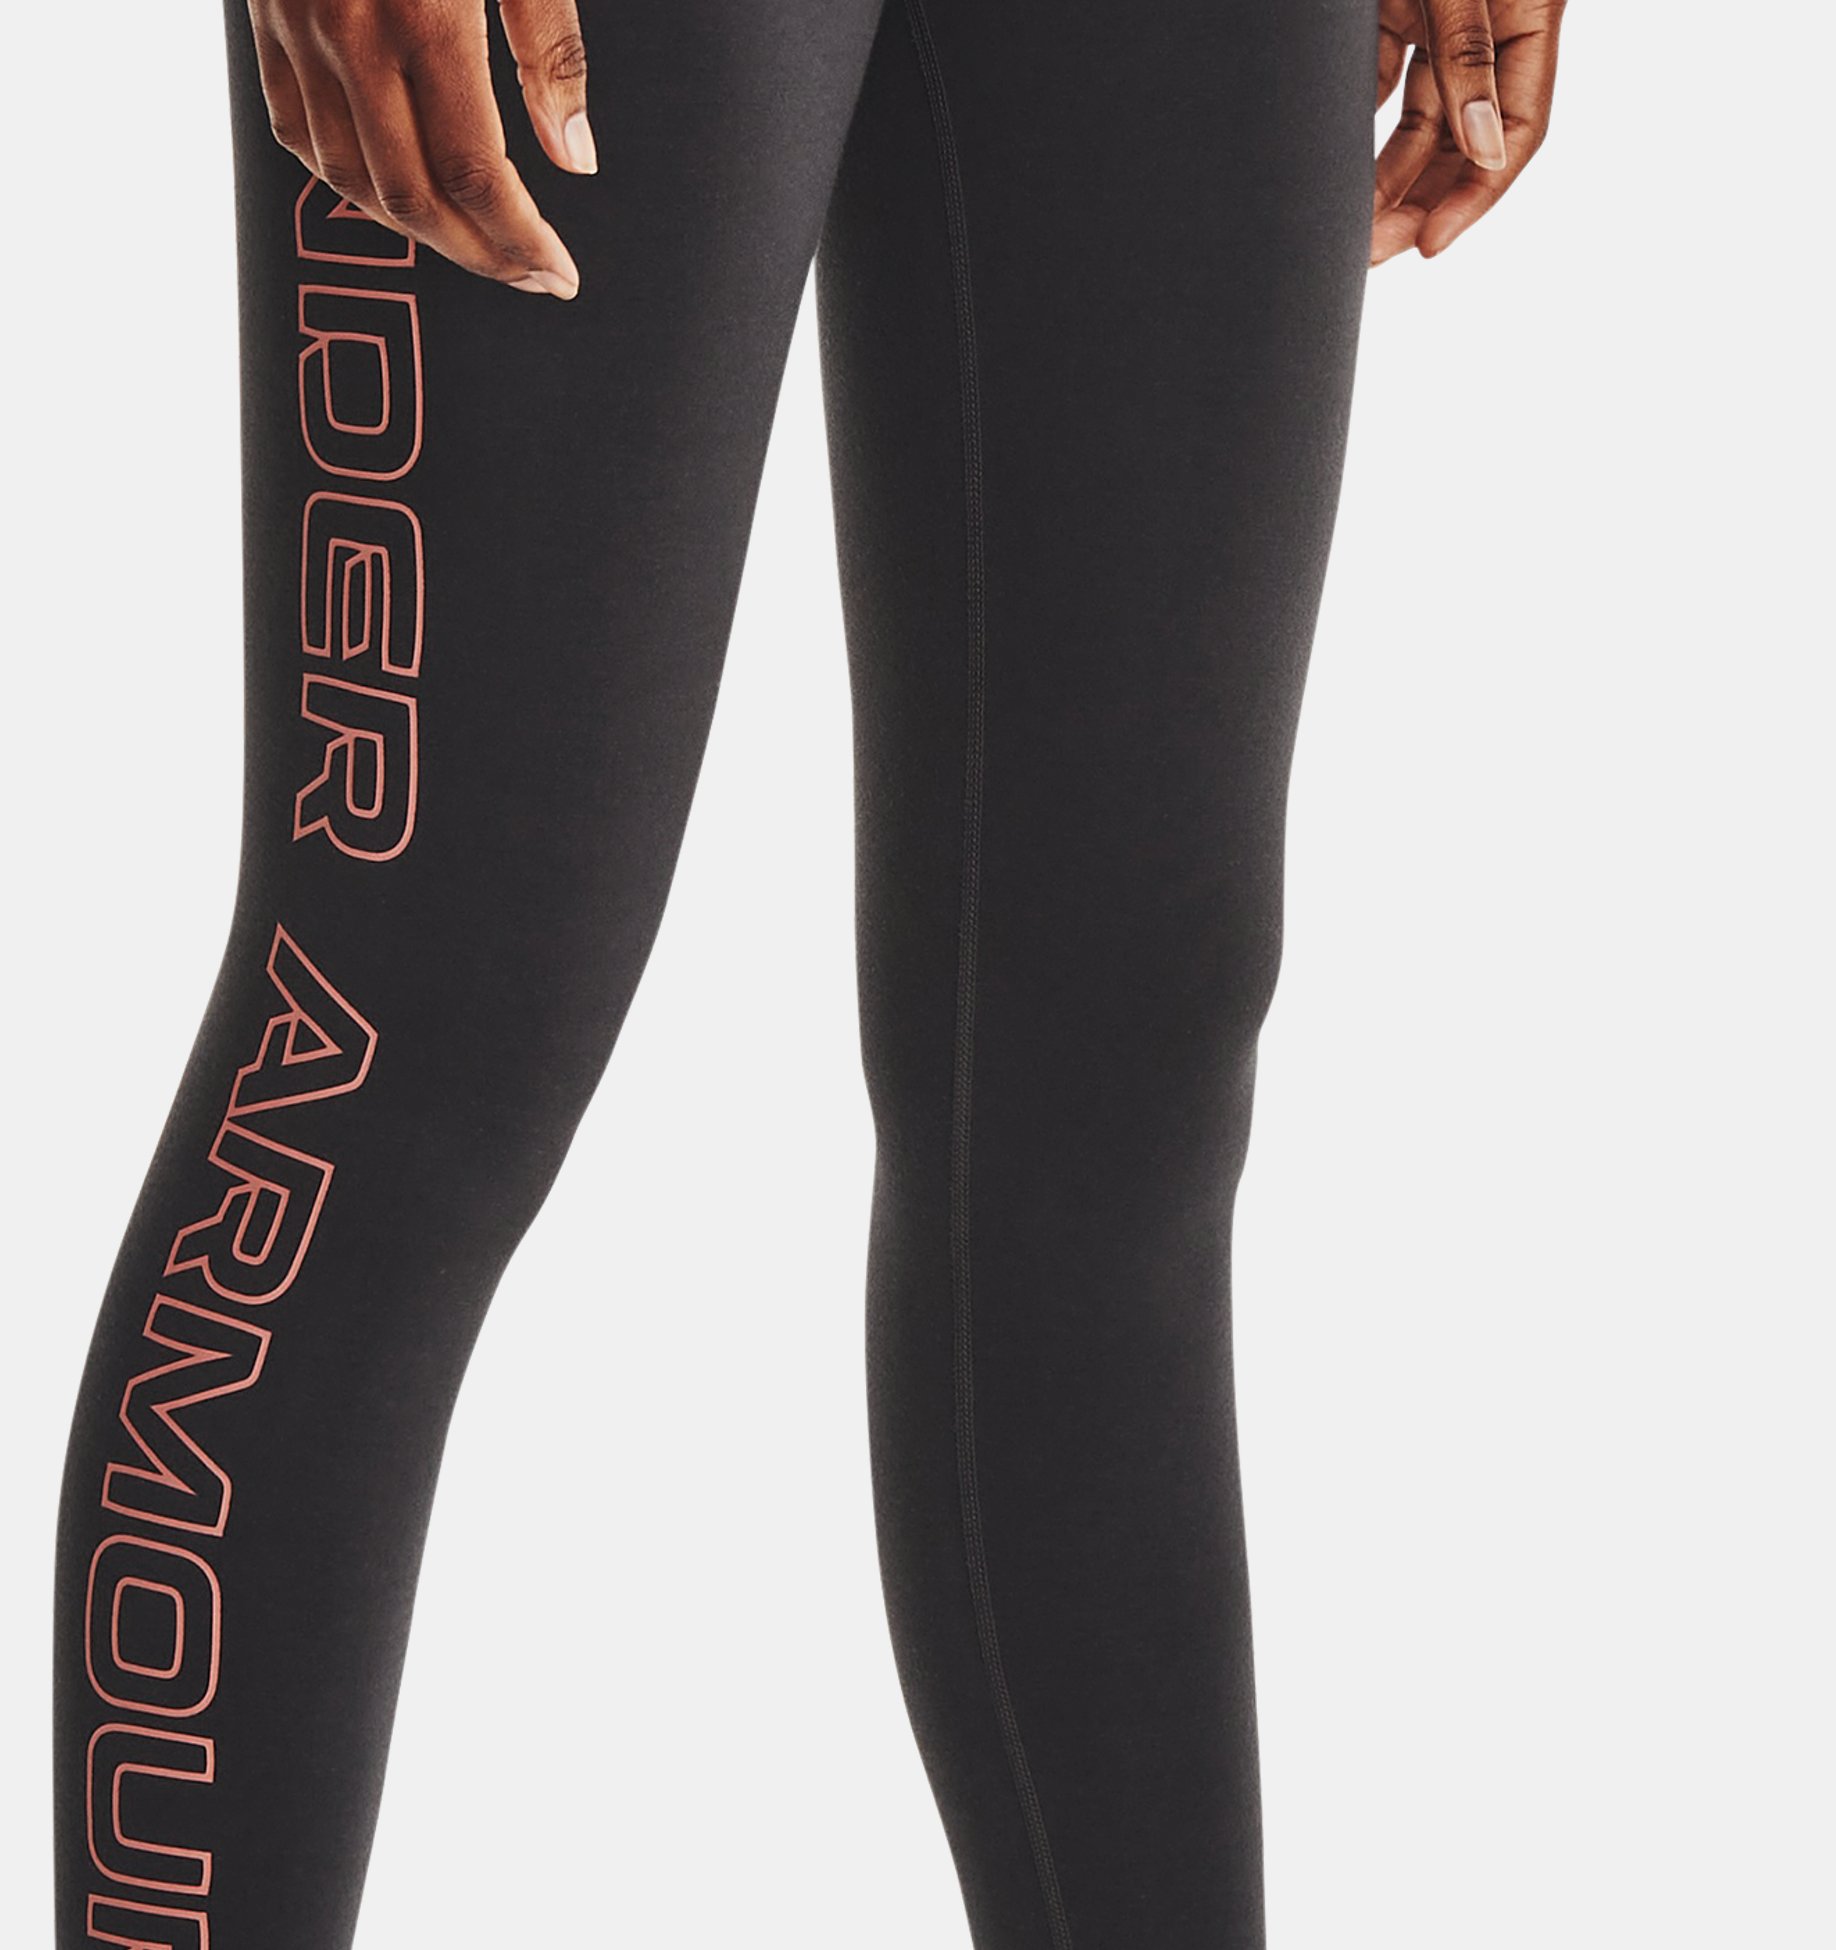 Under Armour Favourite Leggings Womens Grey Size UK Small #REF150